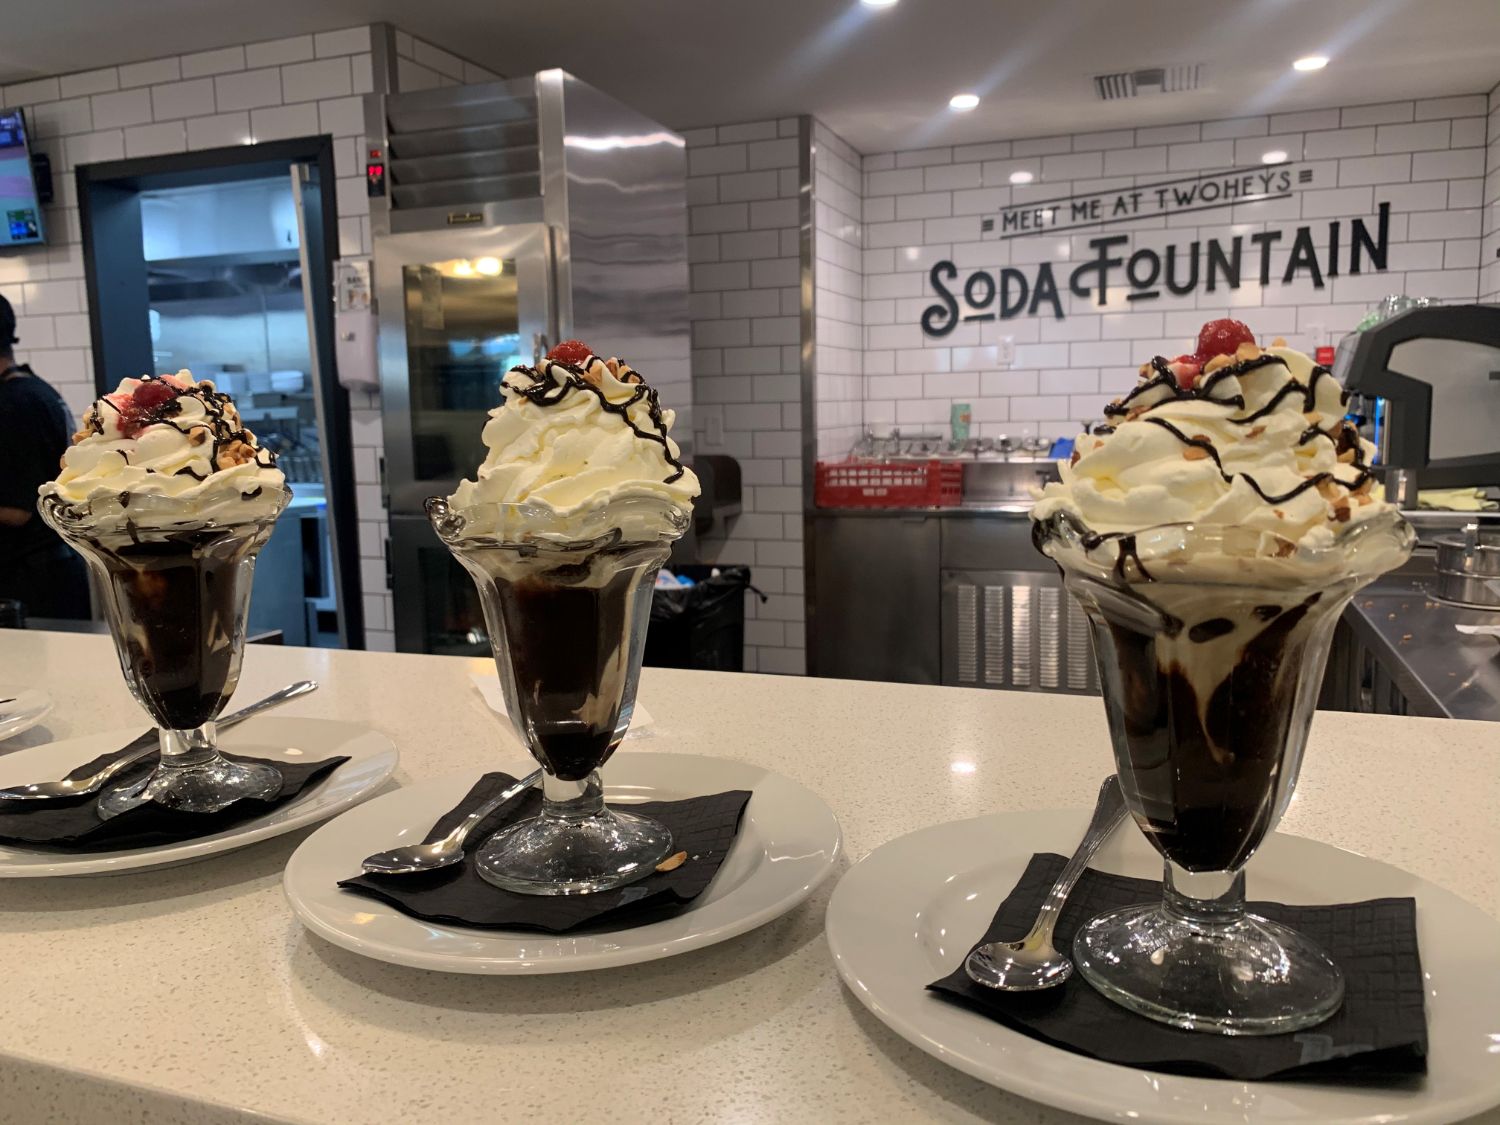 PHOTO: provided by Twohey's | The South Pasadenan | Twohey's famous sundaes served at the soda fountain in South Pasadena.